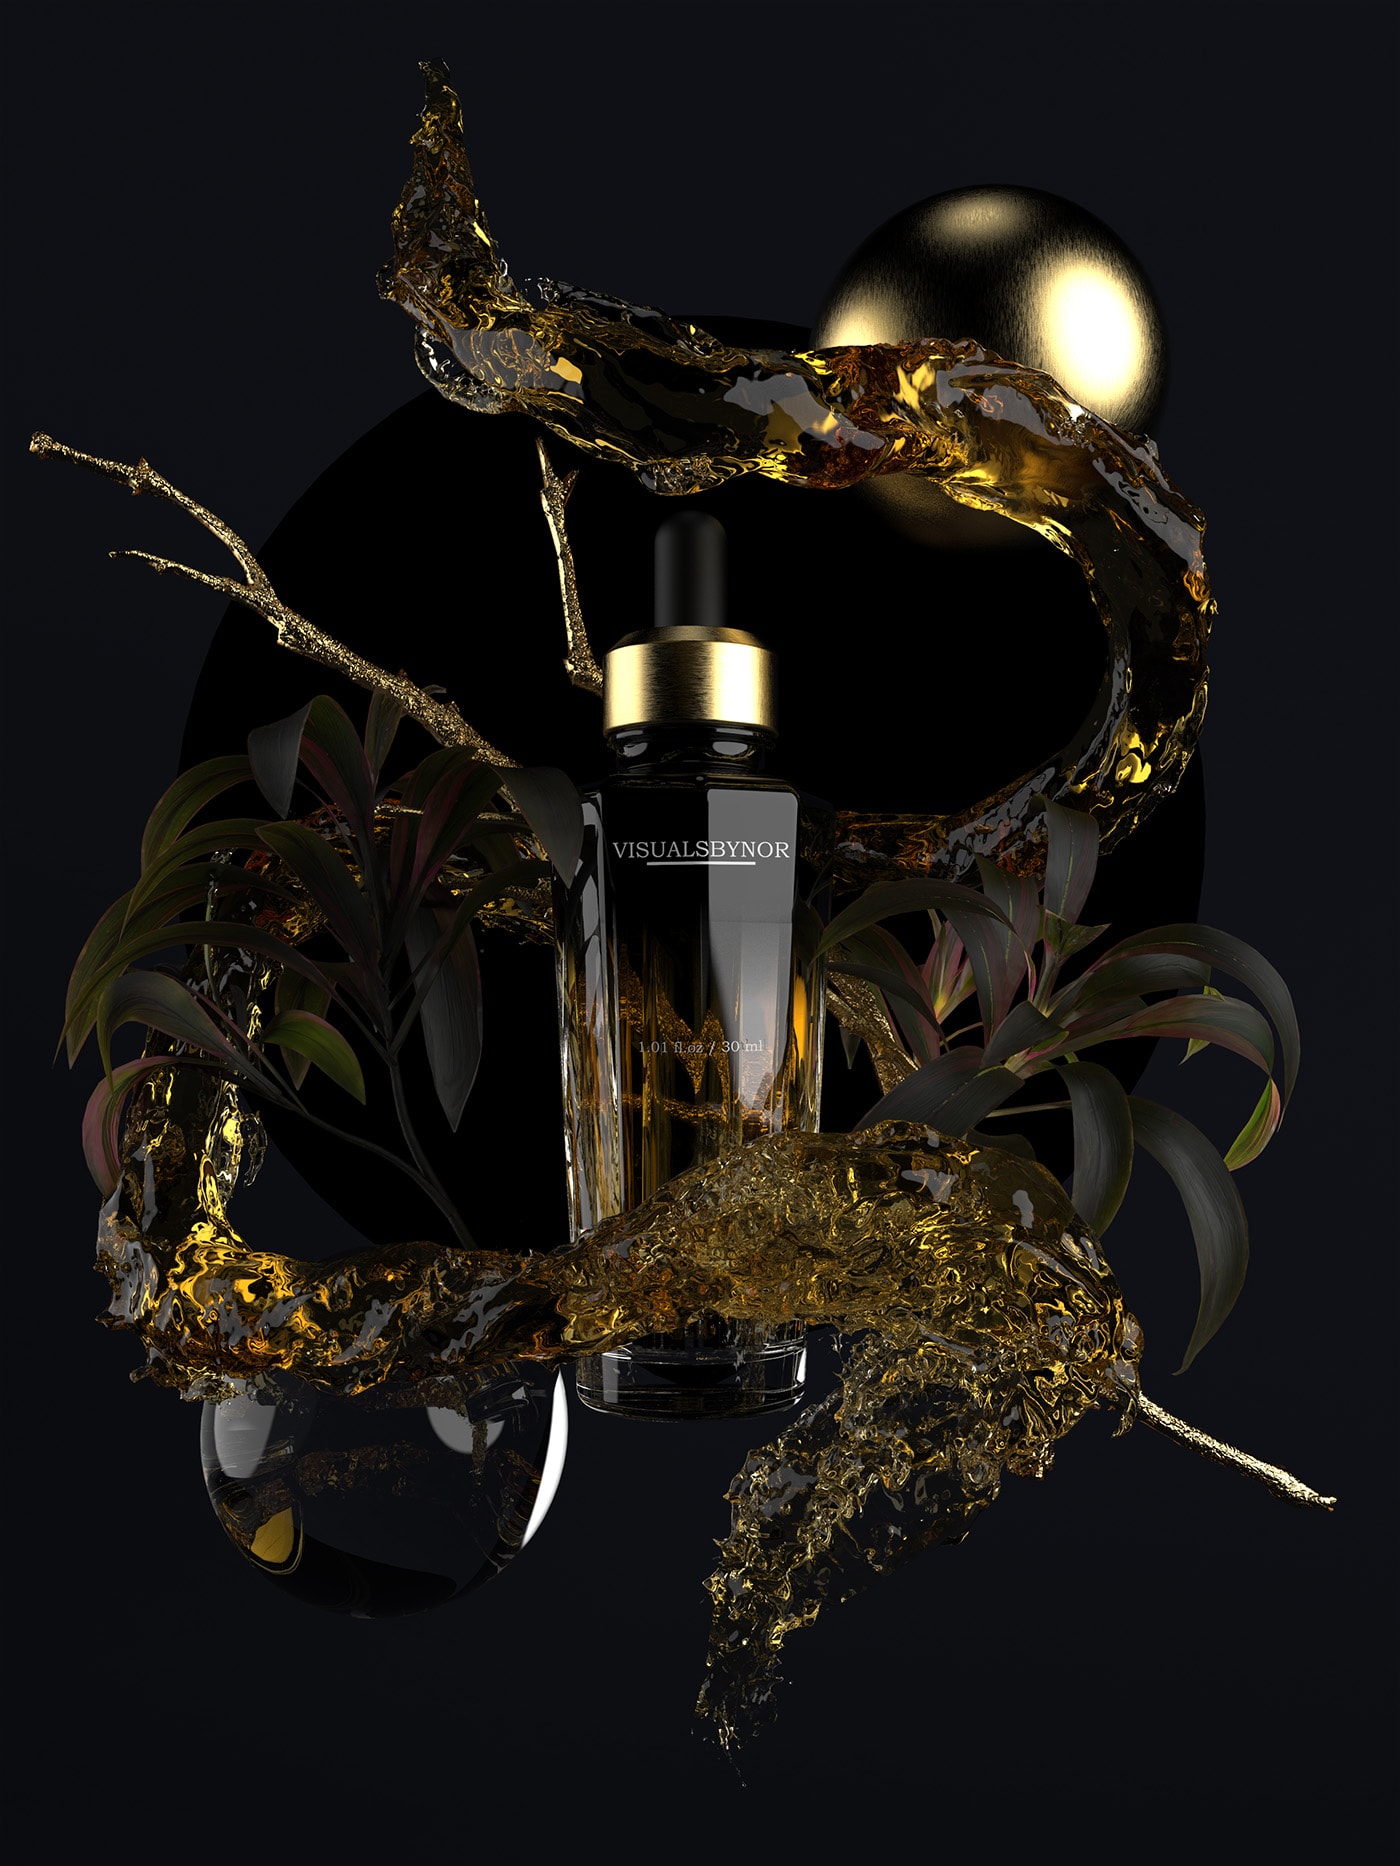 A 3D visualization of a luxurious cosmetics product